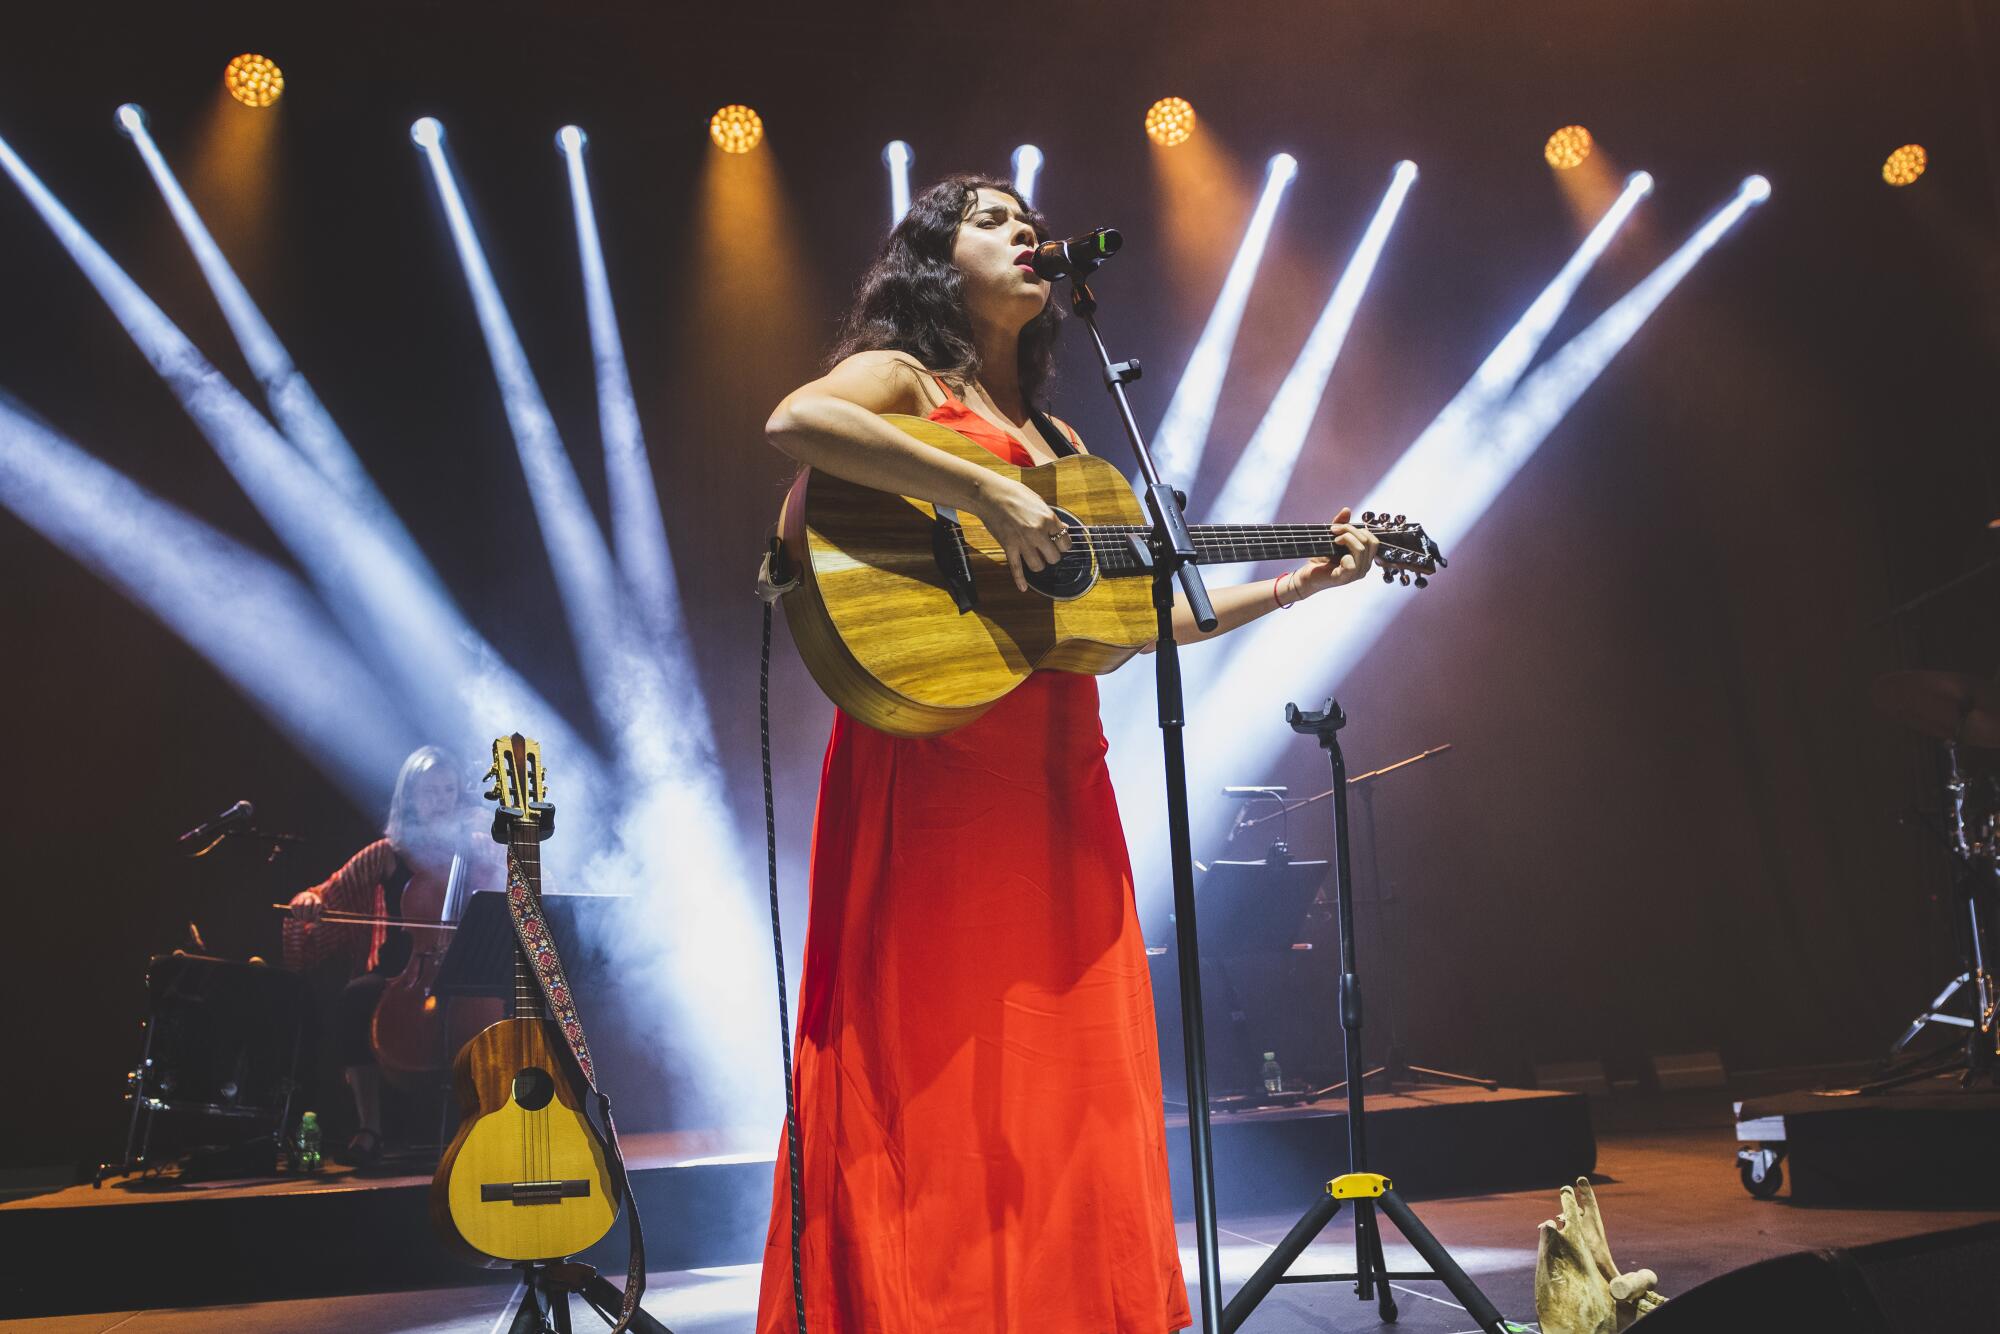 Mexican singer and songwriter Silvana Estrada performs 